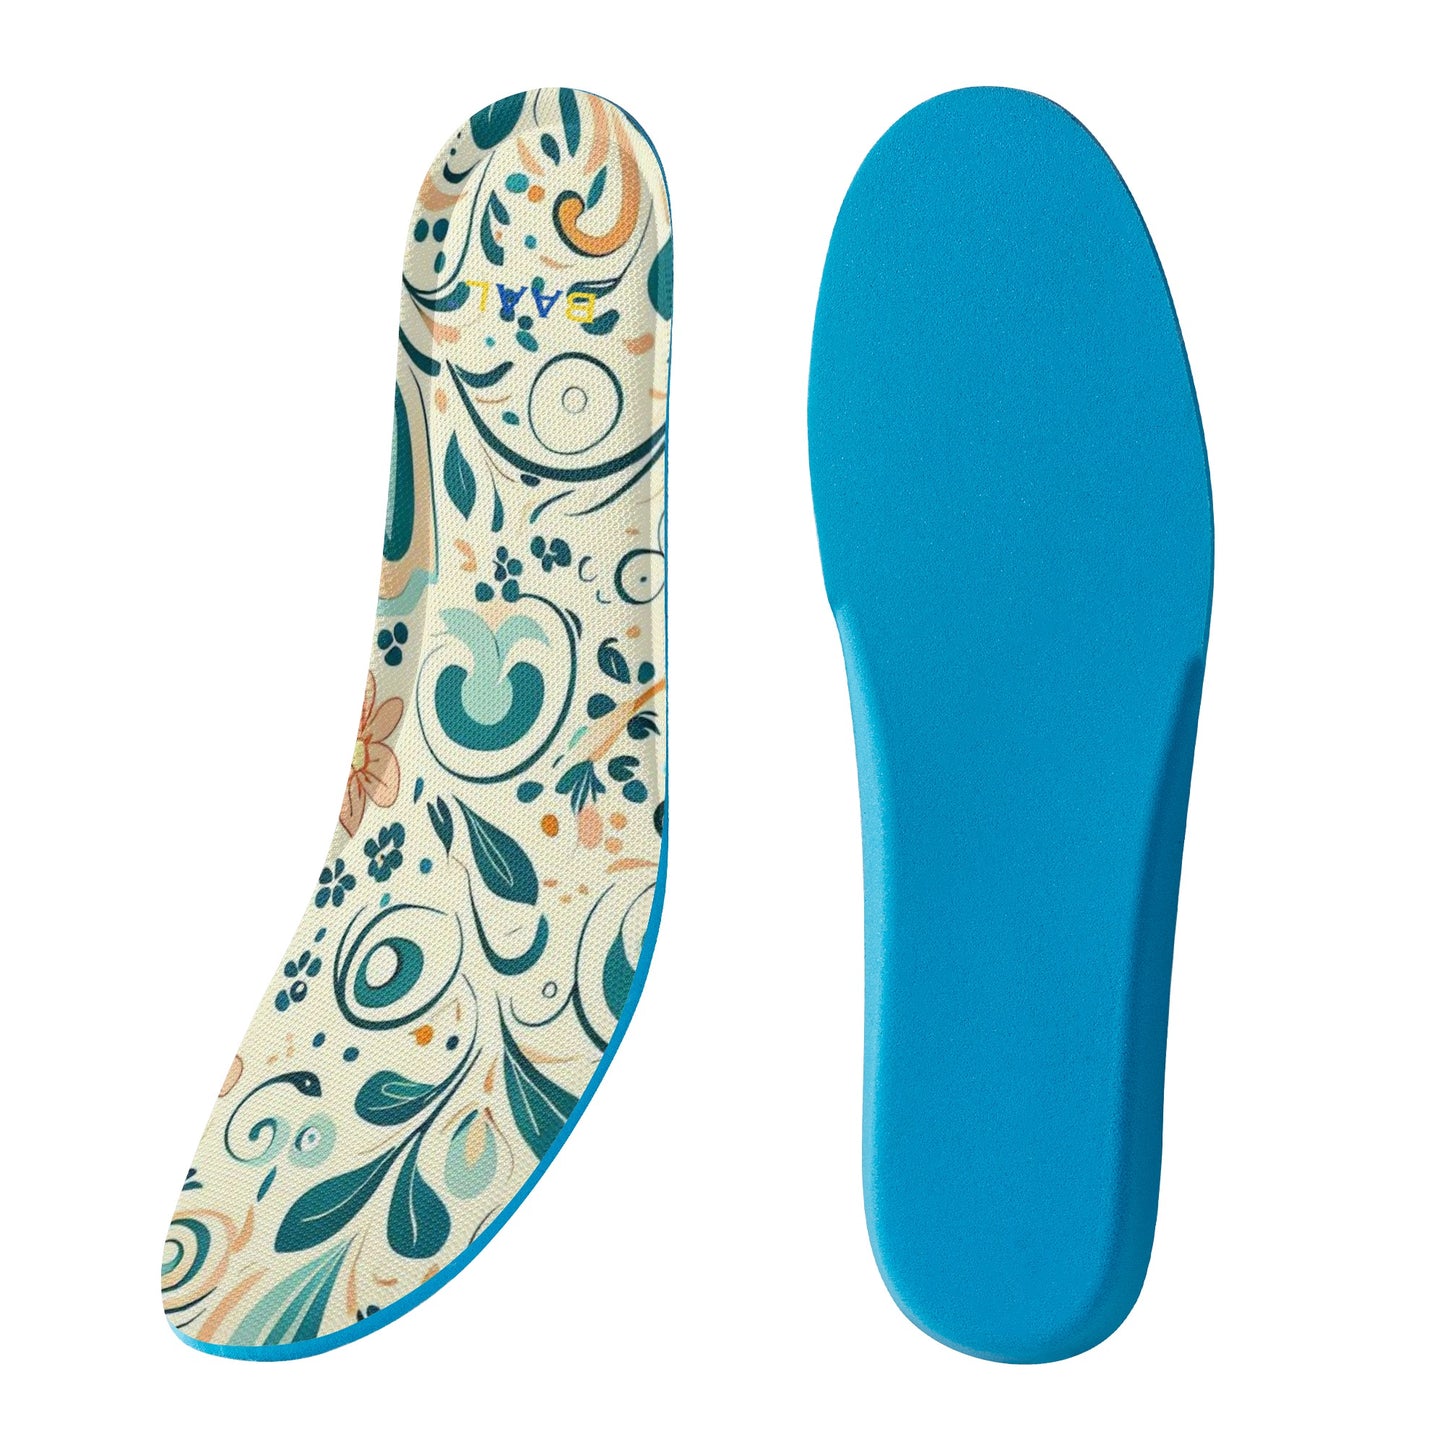 Comfortable Insole: Padded Insole for All-Day Comfort